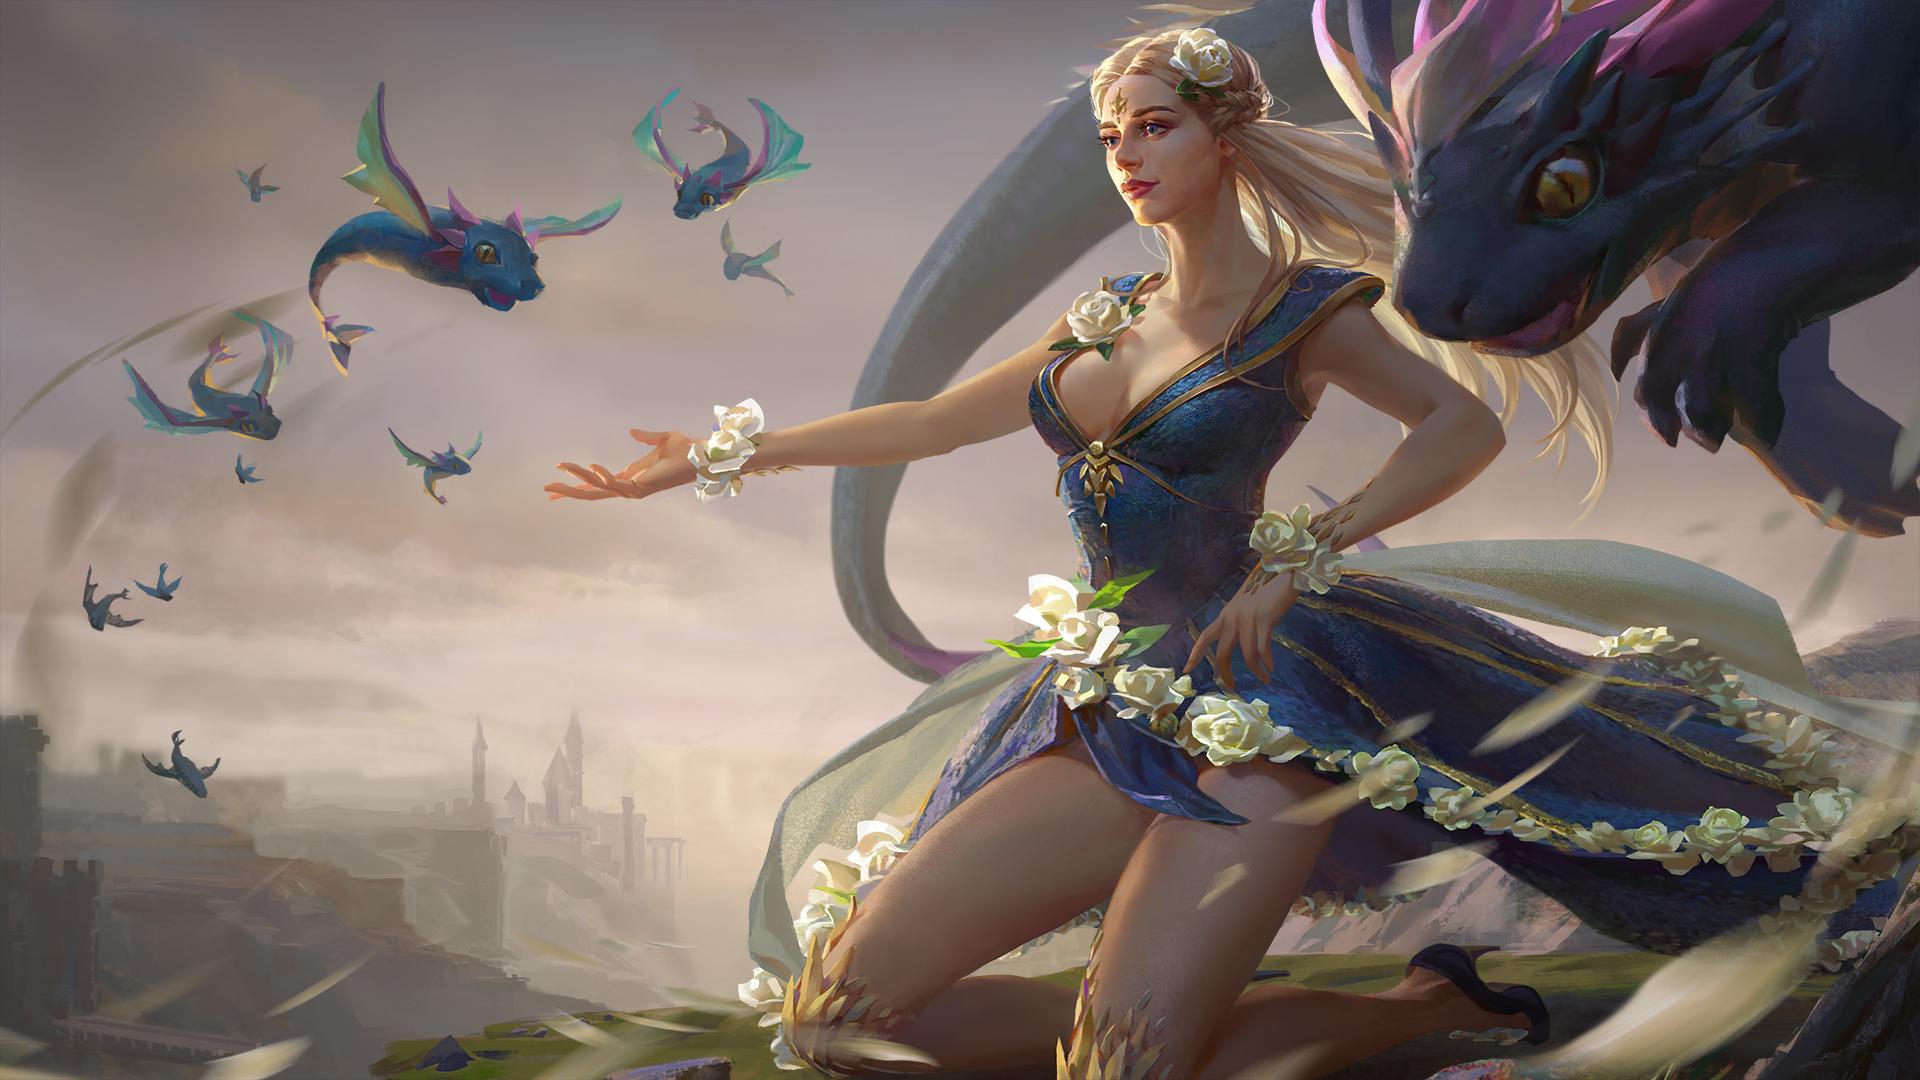 Mother of Dragons Calamity Wallpaper. Heroes of Newerth Lore